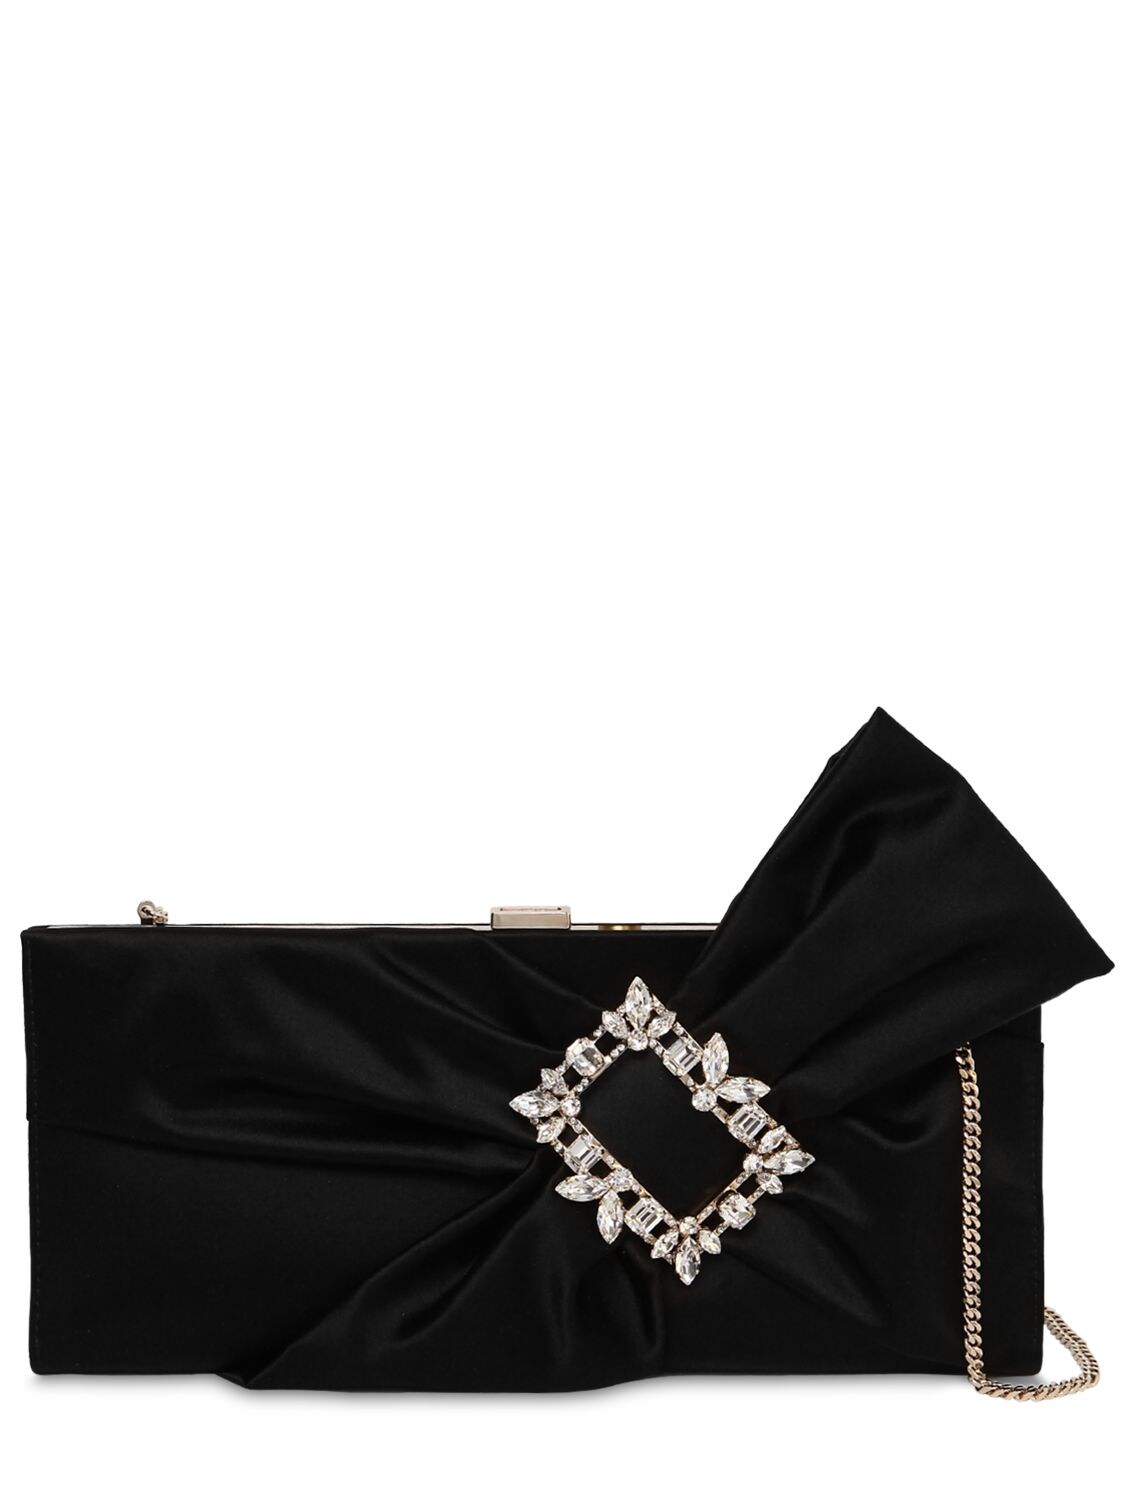 ROGER VIVIER TRIANON SATIN CLUTCH W/ EMBELLISHED BOW,69IVUW003-QJK5OQ2